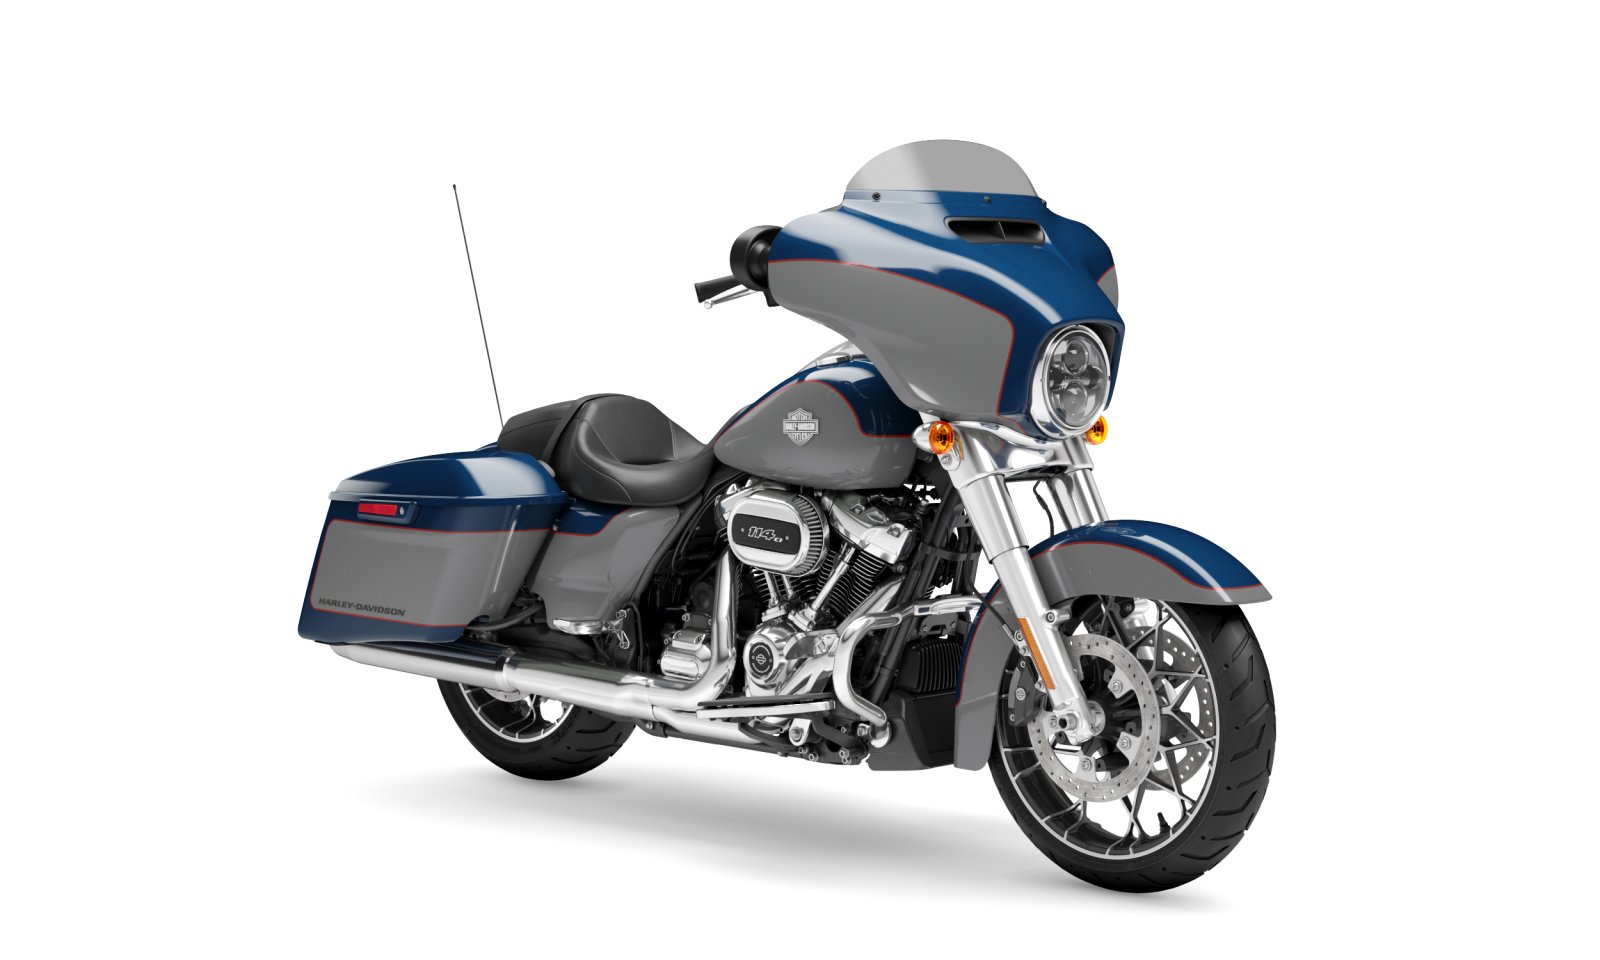 https://www.harley-davidson.com/content/dam/h-d/images/product-images/bikes/motorcycle/2023/2023-street-glide-special/2023-street-glide-special-f94/360/2023-street-glide-special-f94-motorcycle-03.jpg?impolicy=myresize&rw=1600